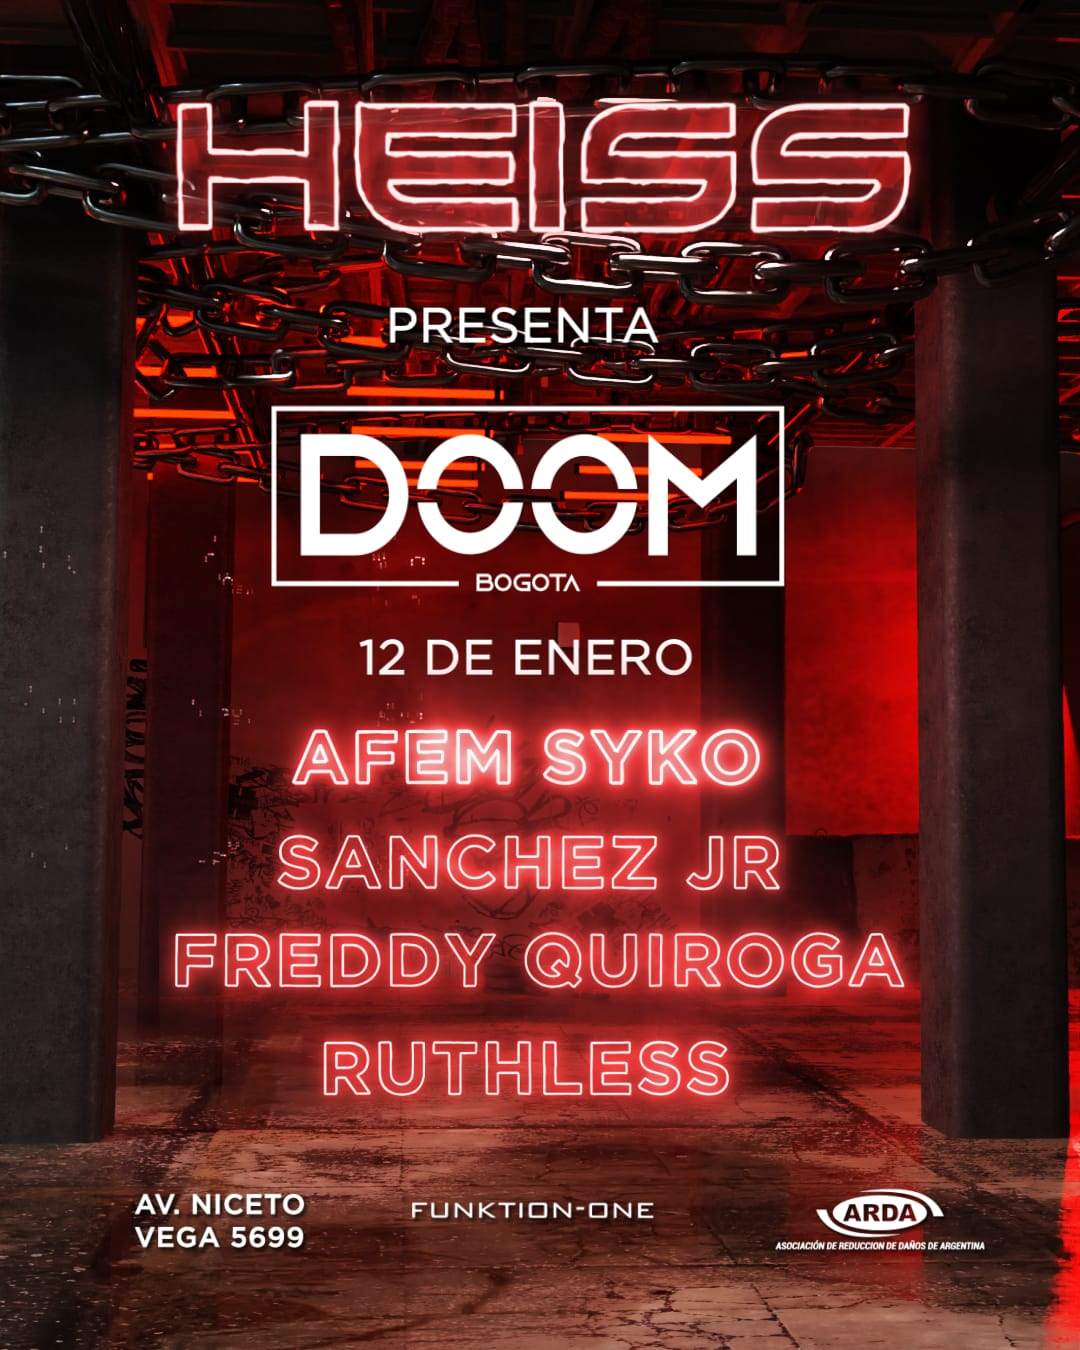 Afem Syko - Sánchez Jr.- Freddy Quiroga - Ruthless x HEISS - フライヤー表